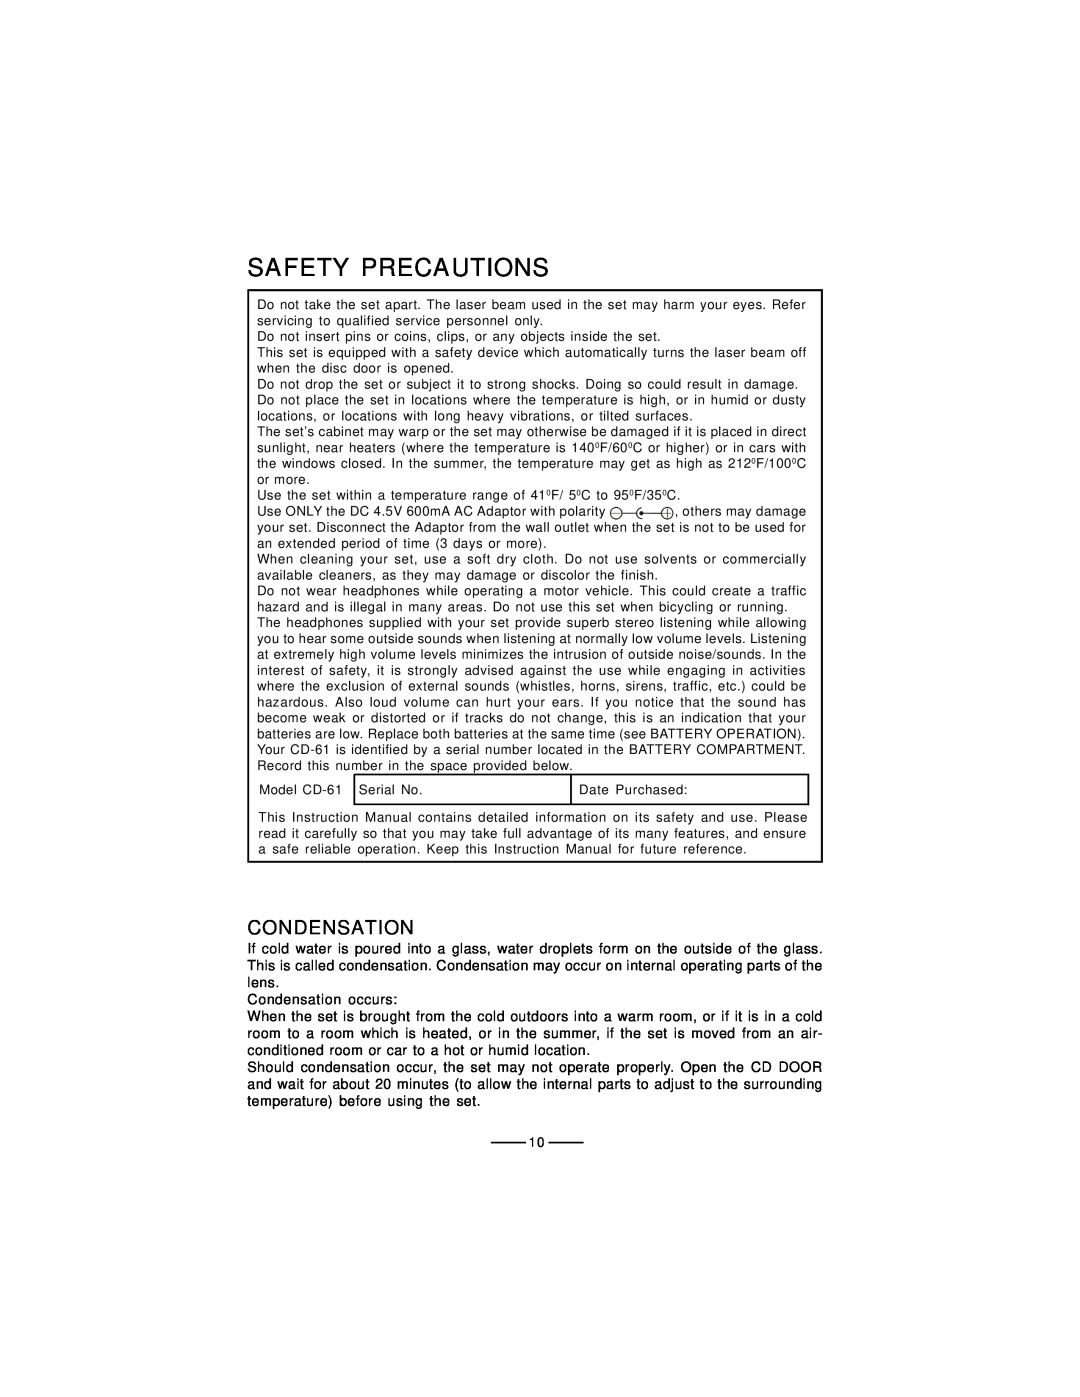 Lenoxx Electronics CD-61 operating instructions Safety Precautions, Condensation 